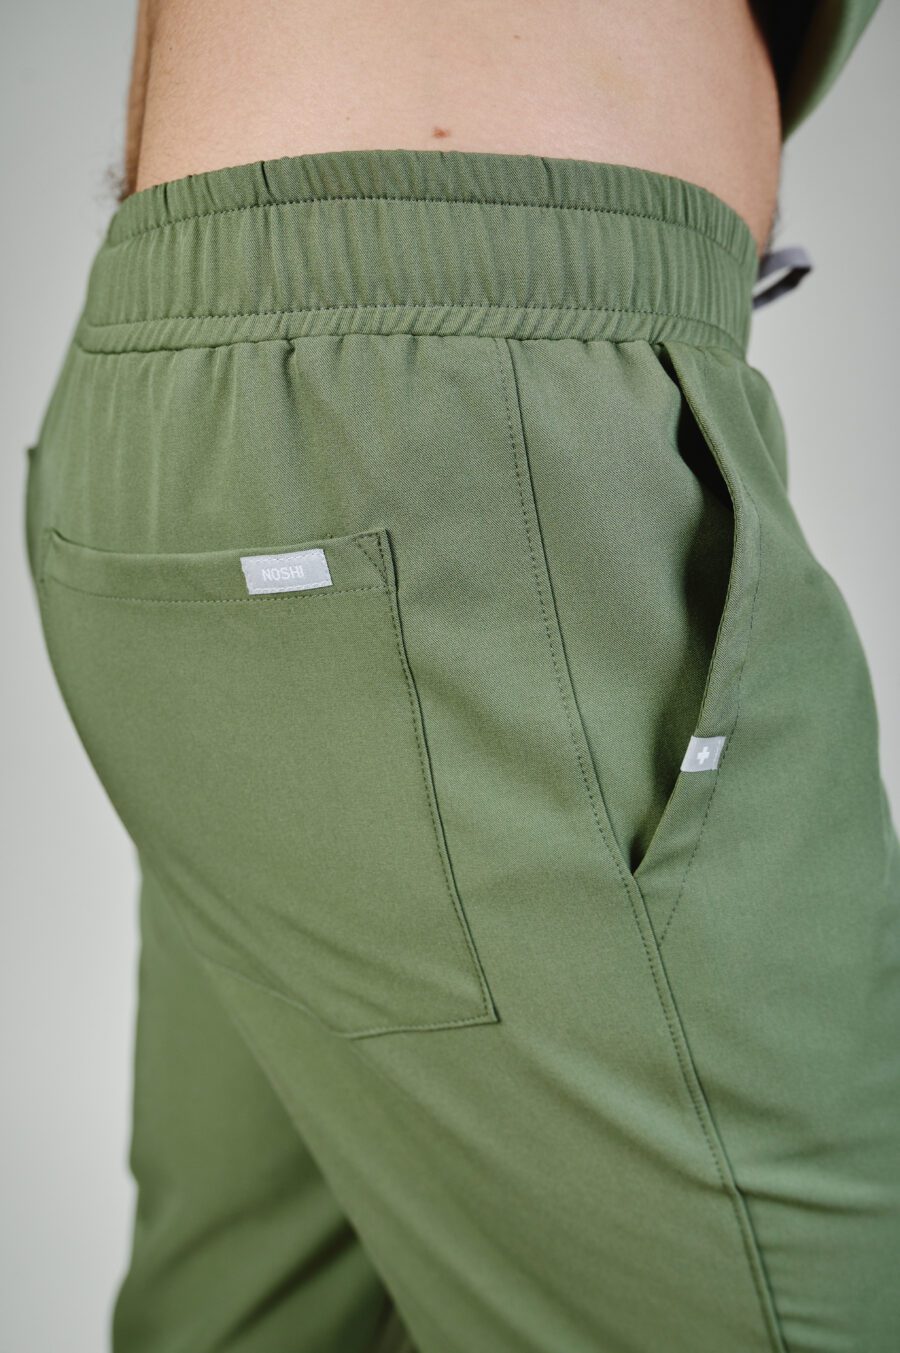 pockets in men's medical trousers - olive